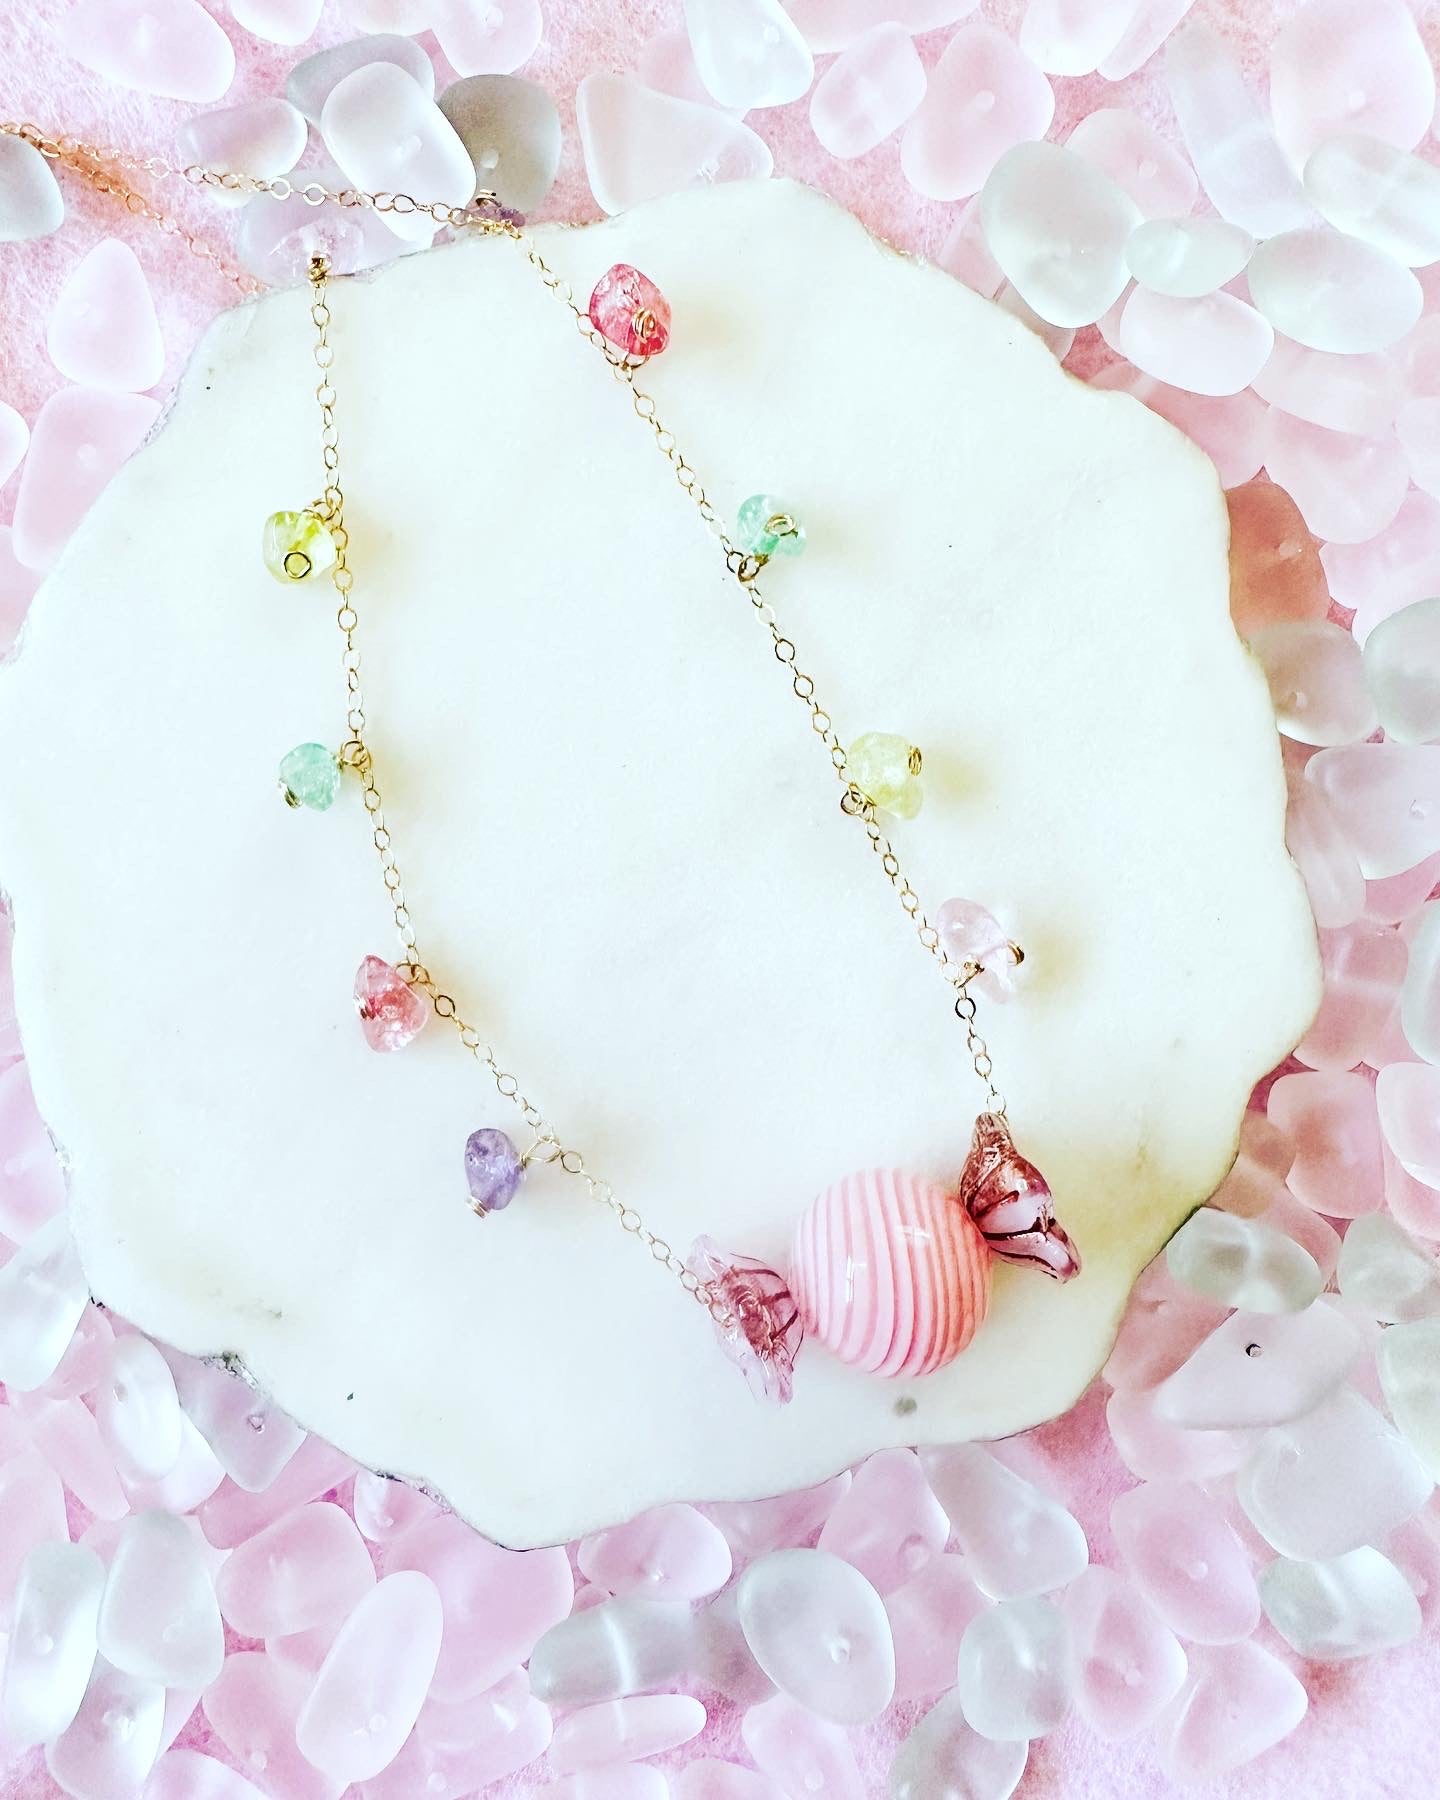 Rainbow Candy Necklace